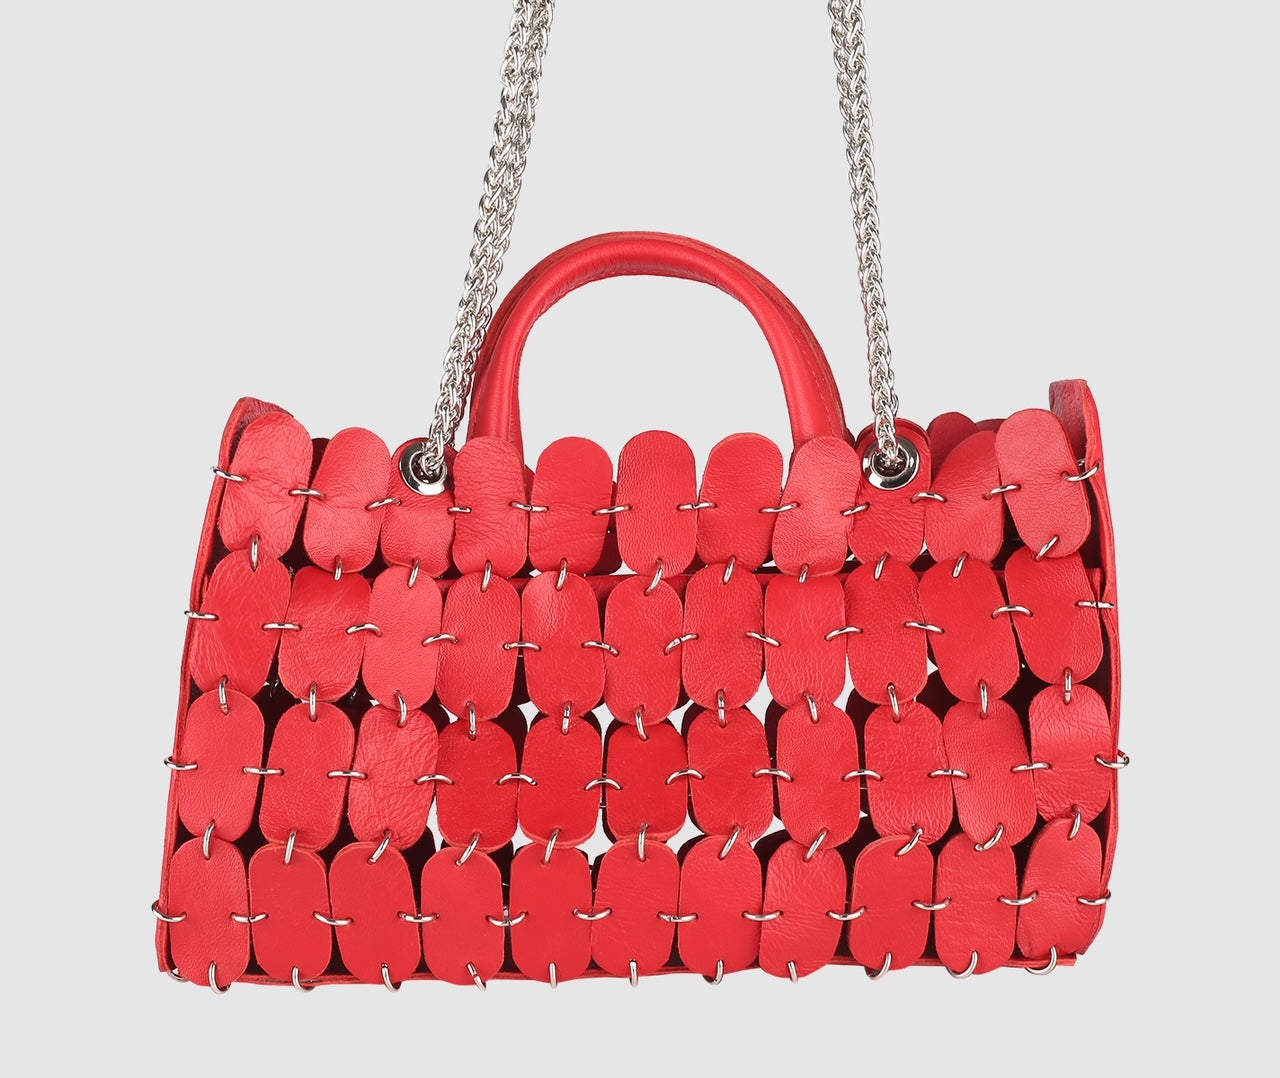 Chrome Leather Bag Red